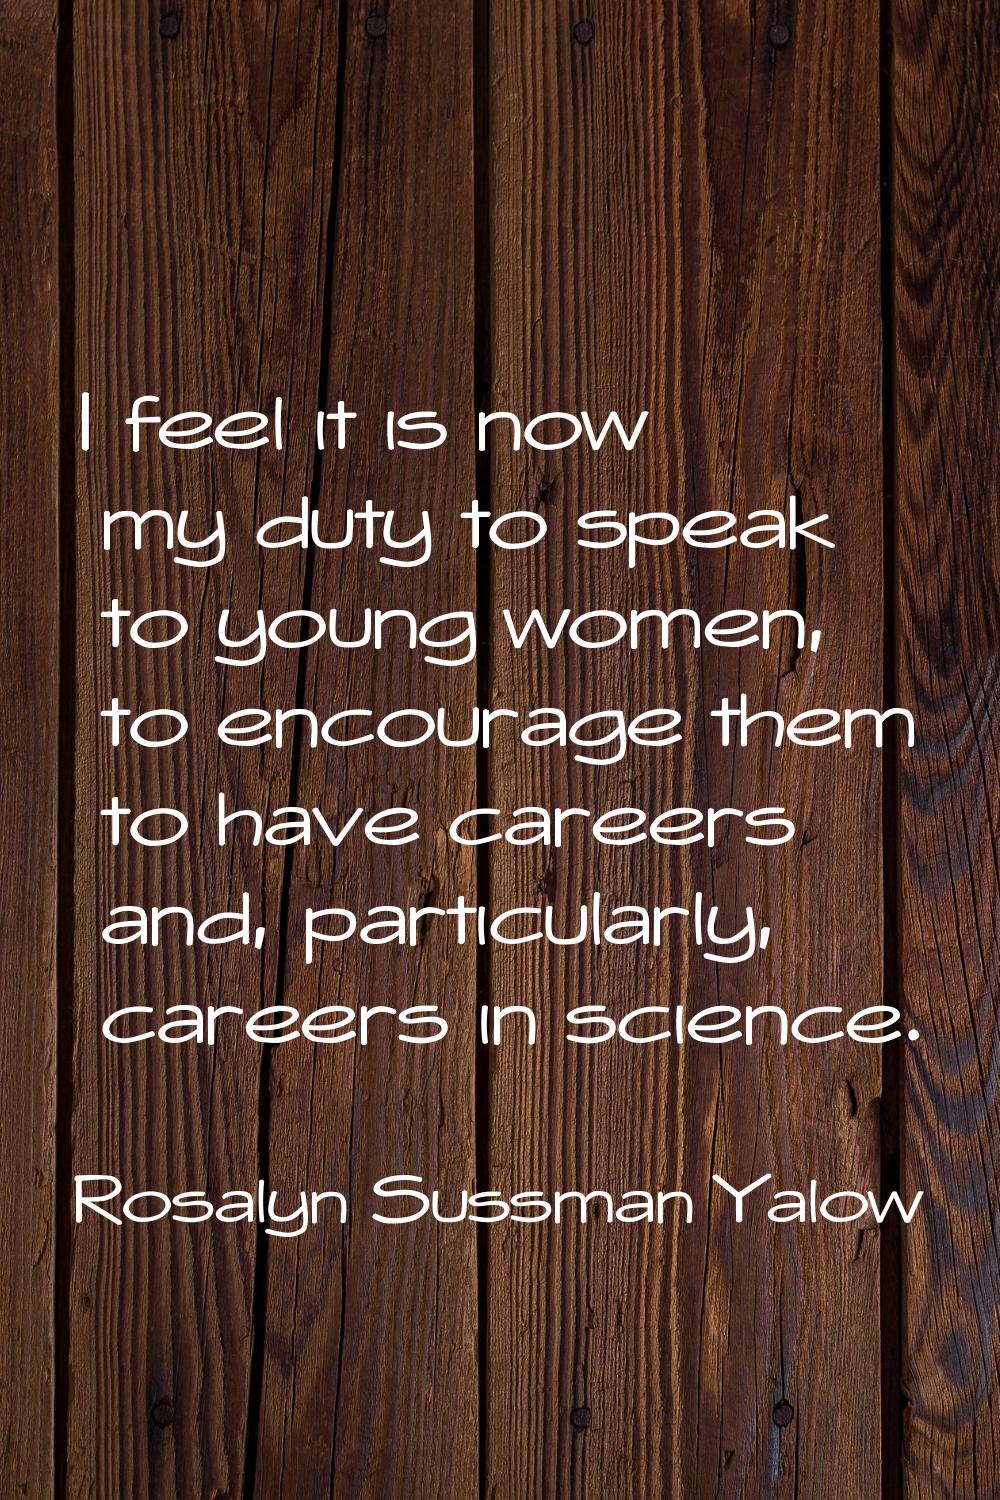 I feel it is now my duty to speak to young women, to encourage them to have careers and, particular